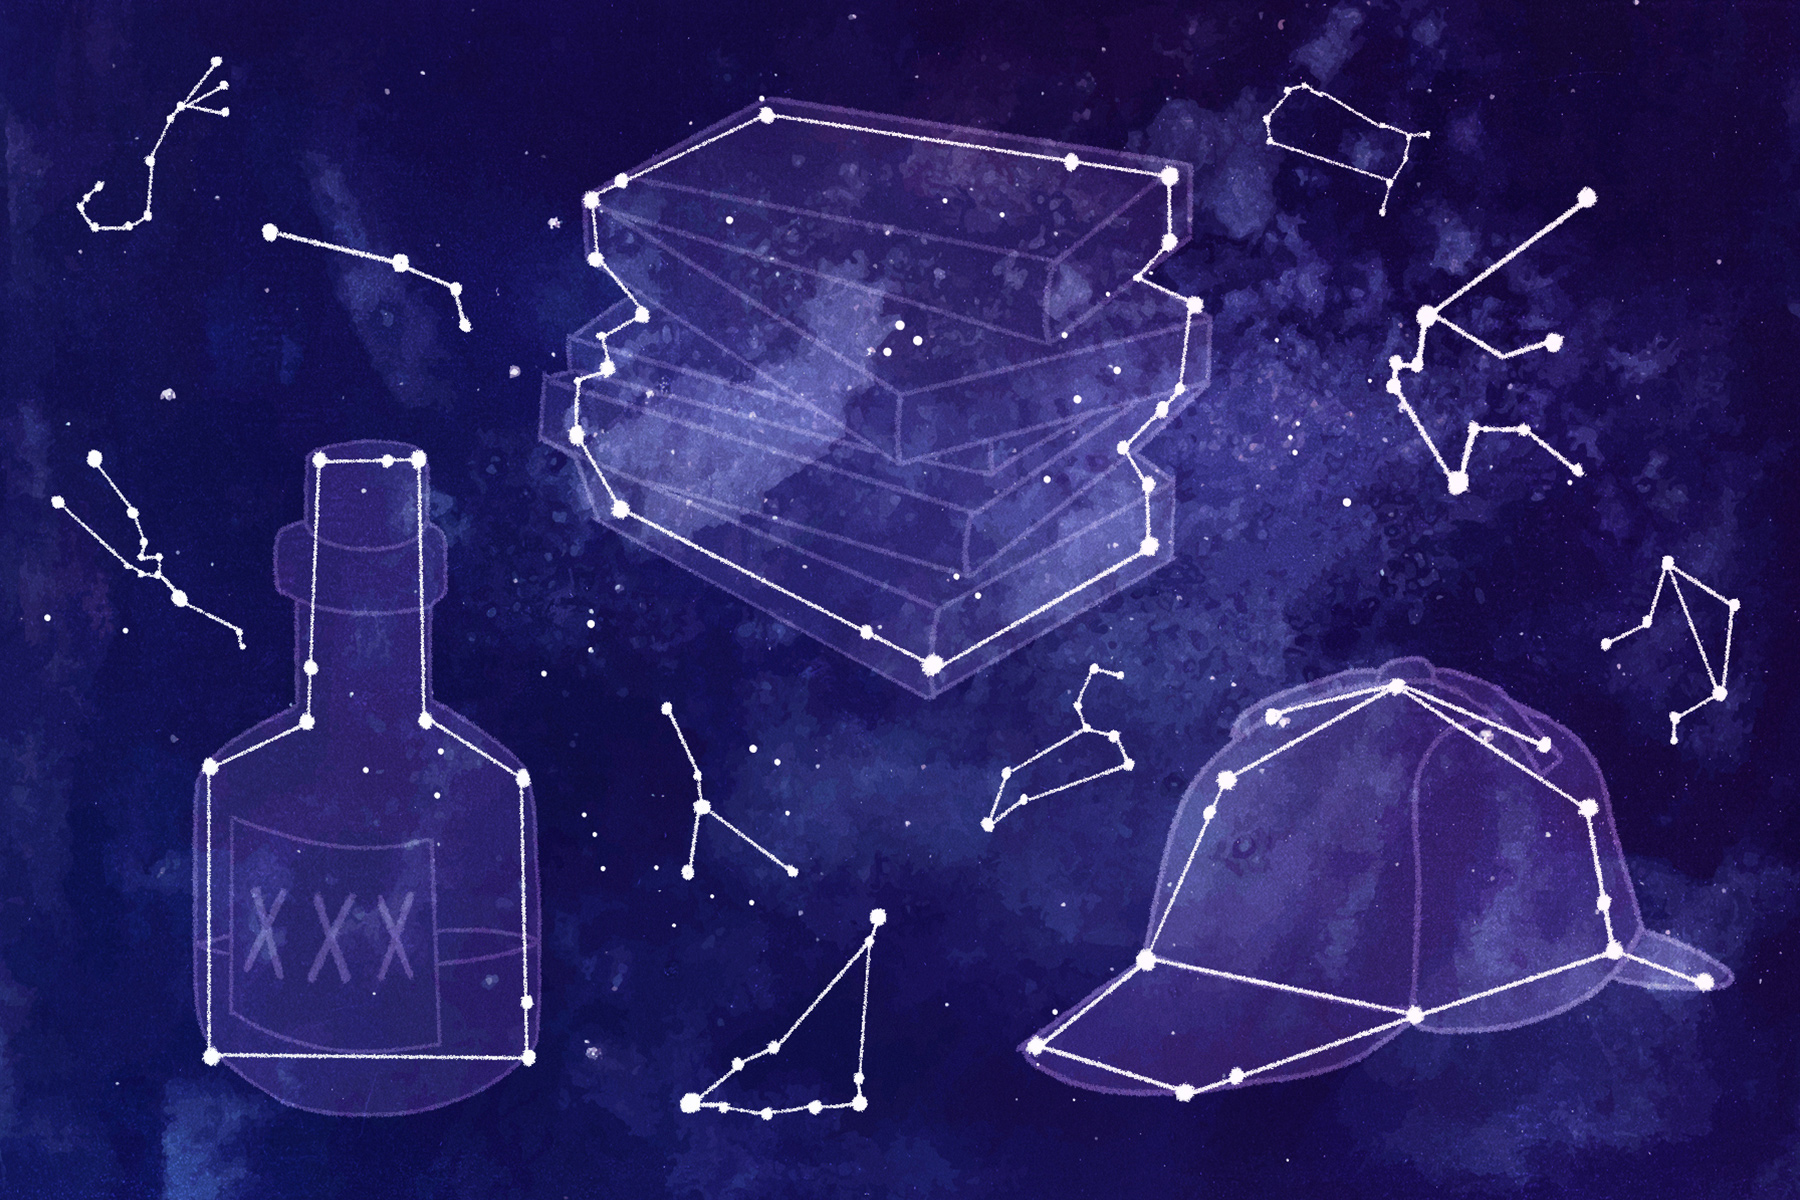 An illustration showing constellations around literary objects, such as a stack of books and a deerstalker.